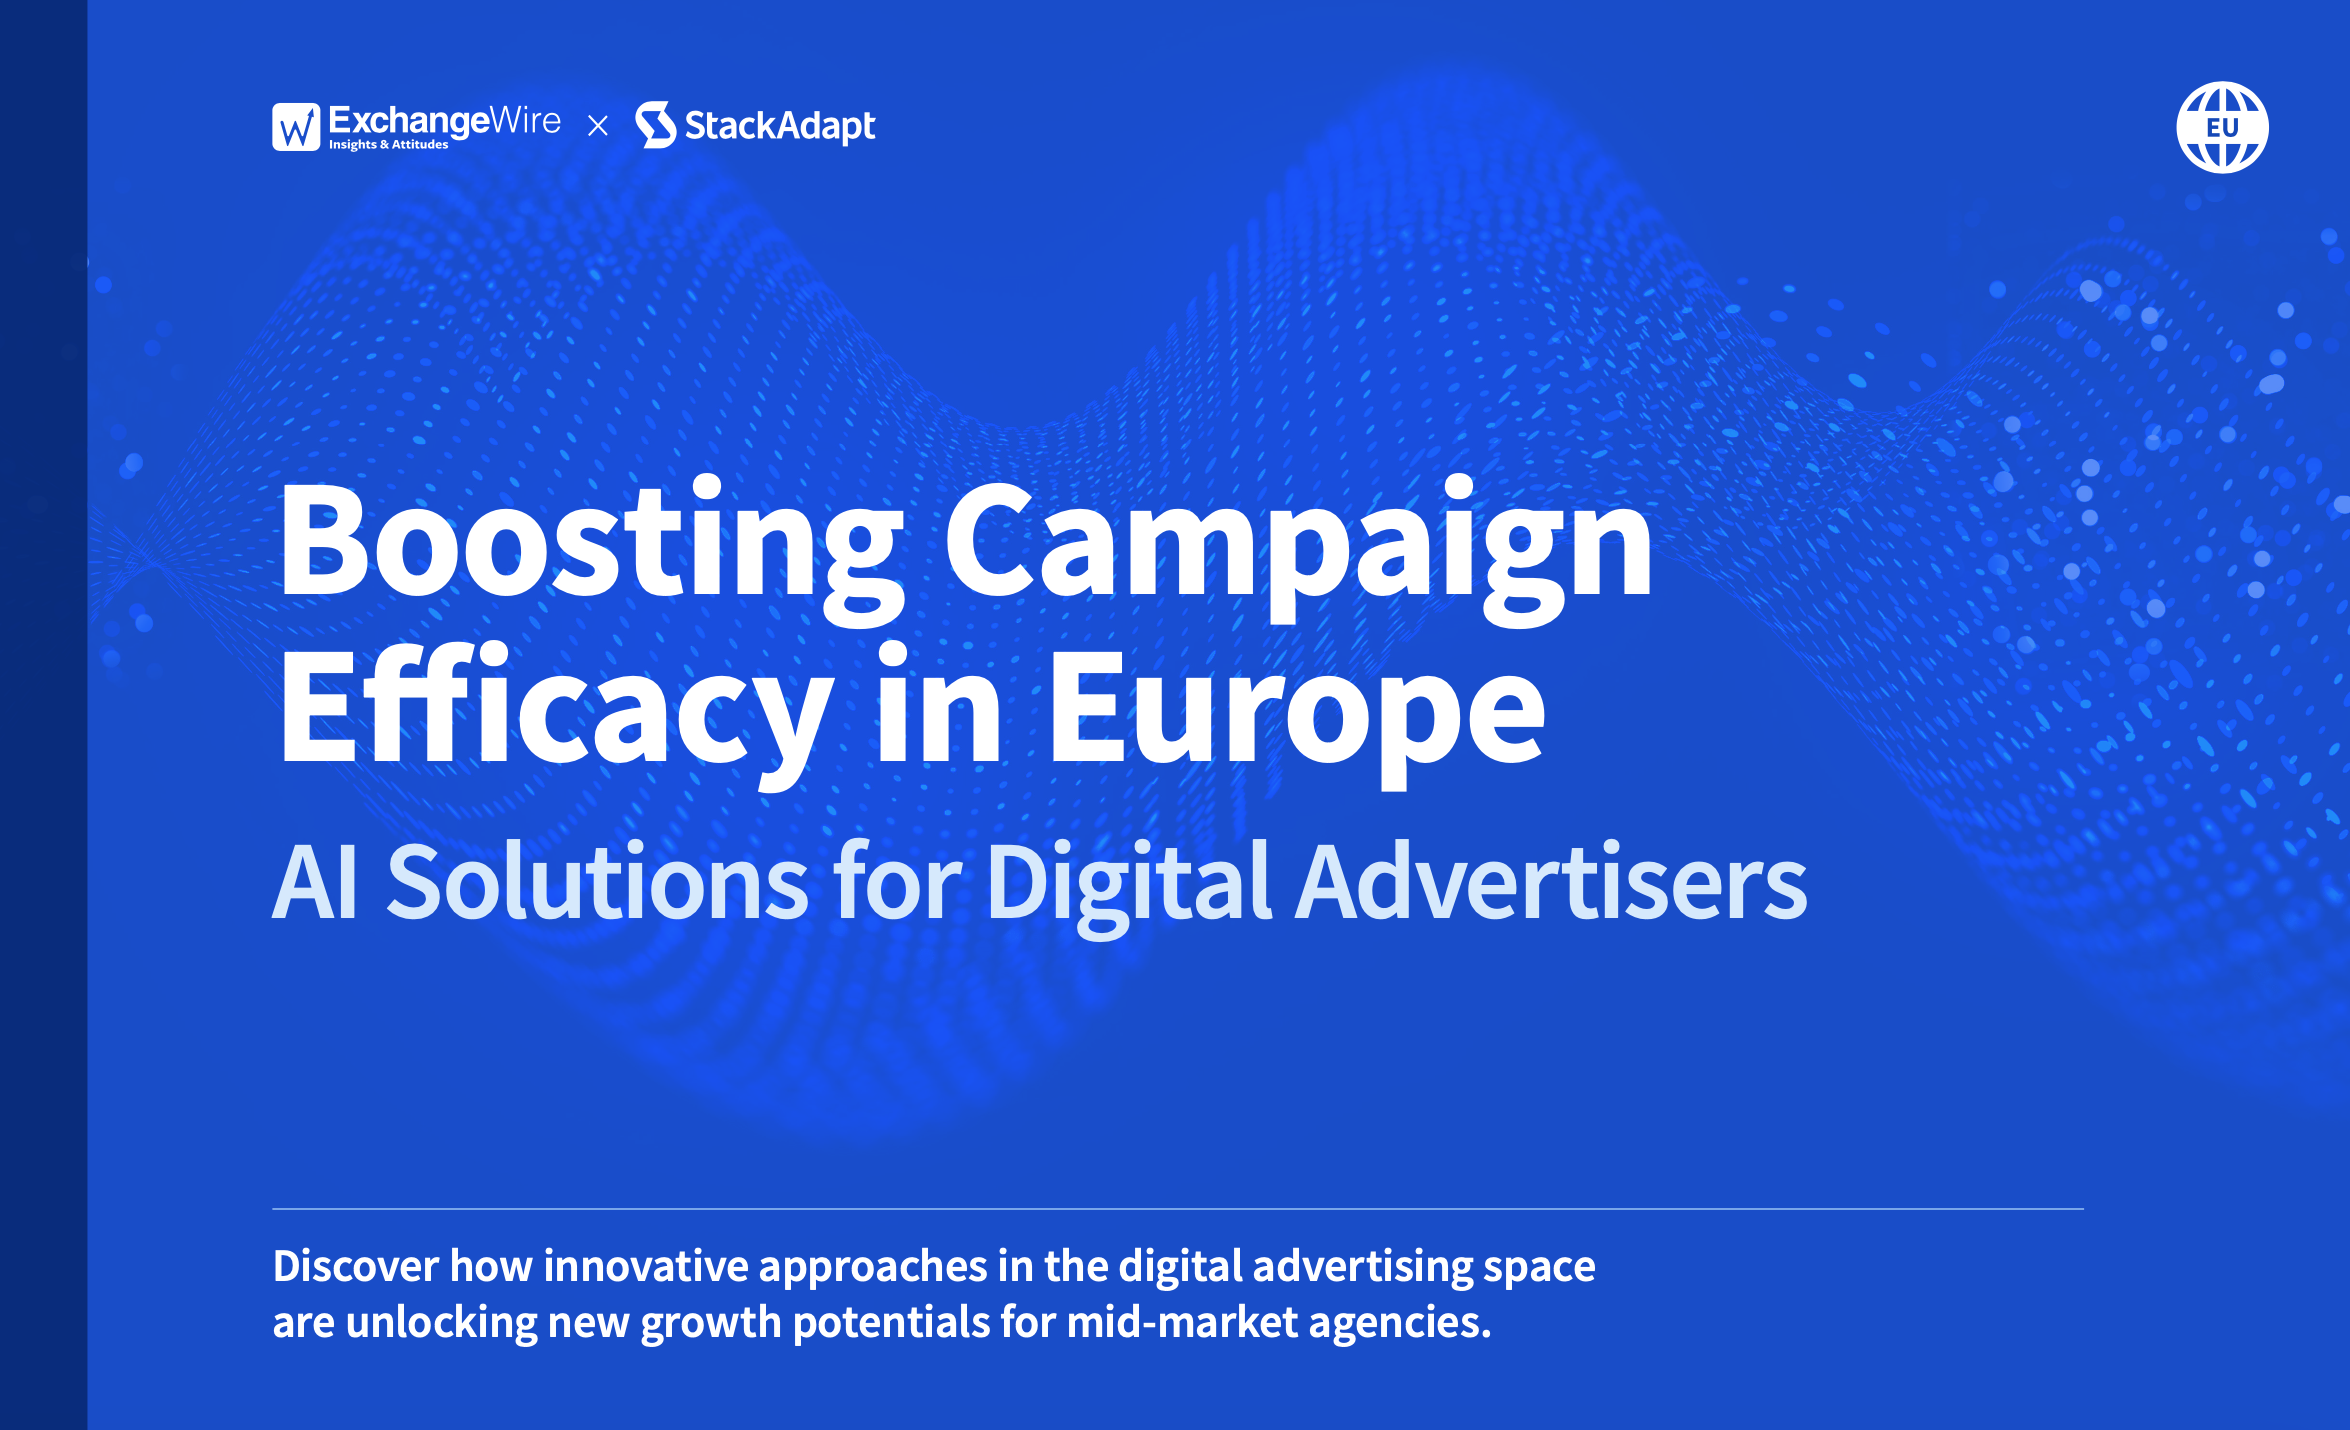 StackAdapt x Exchange Wire: Boosting Campaign Efficacy in Europe AI Solutions for Digital Advertisers